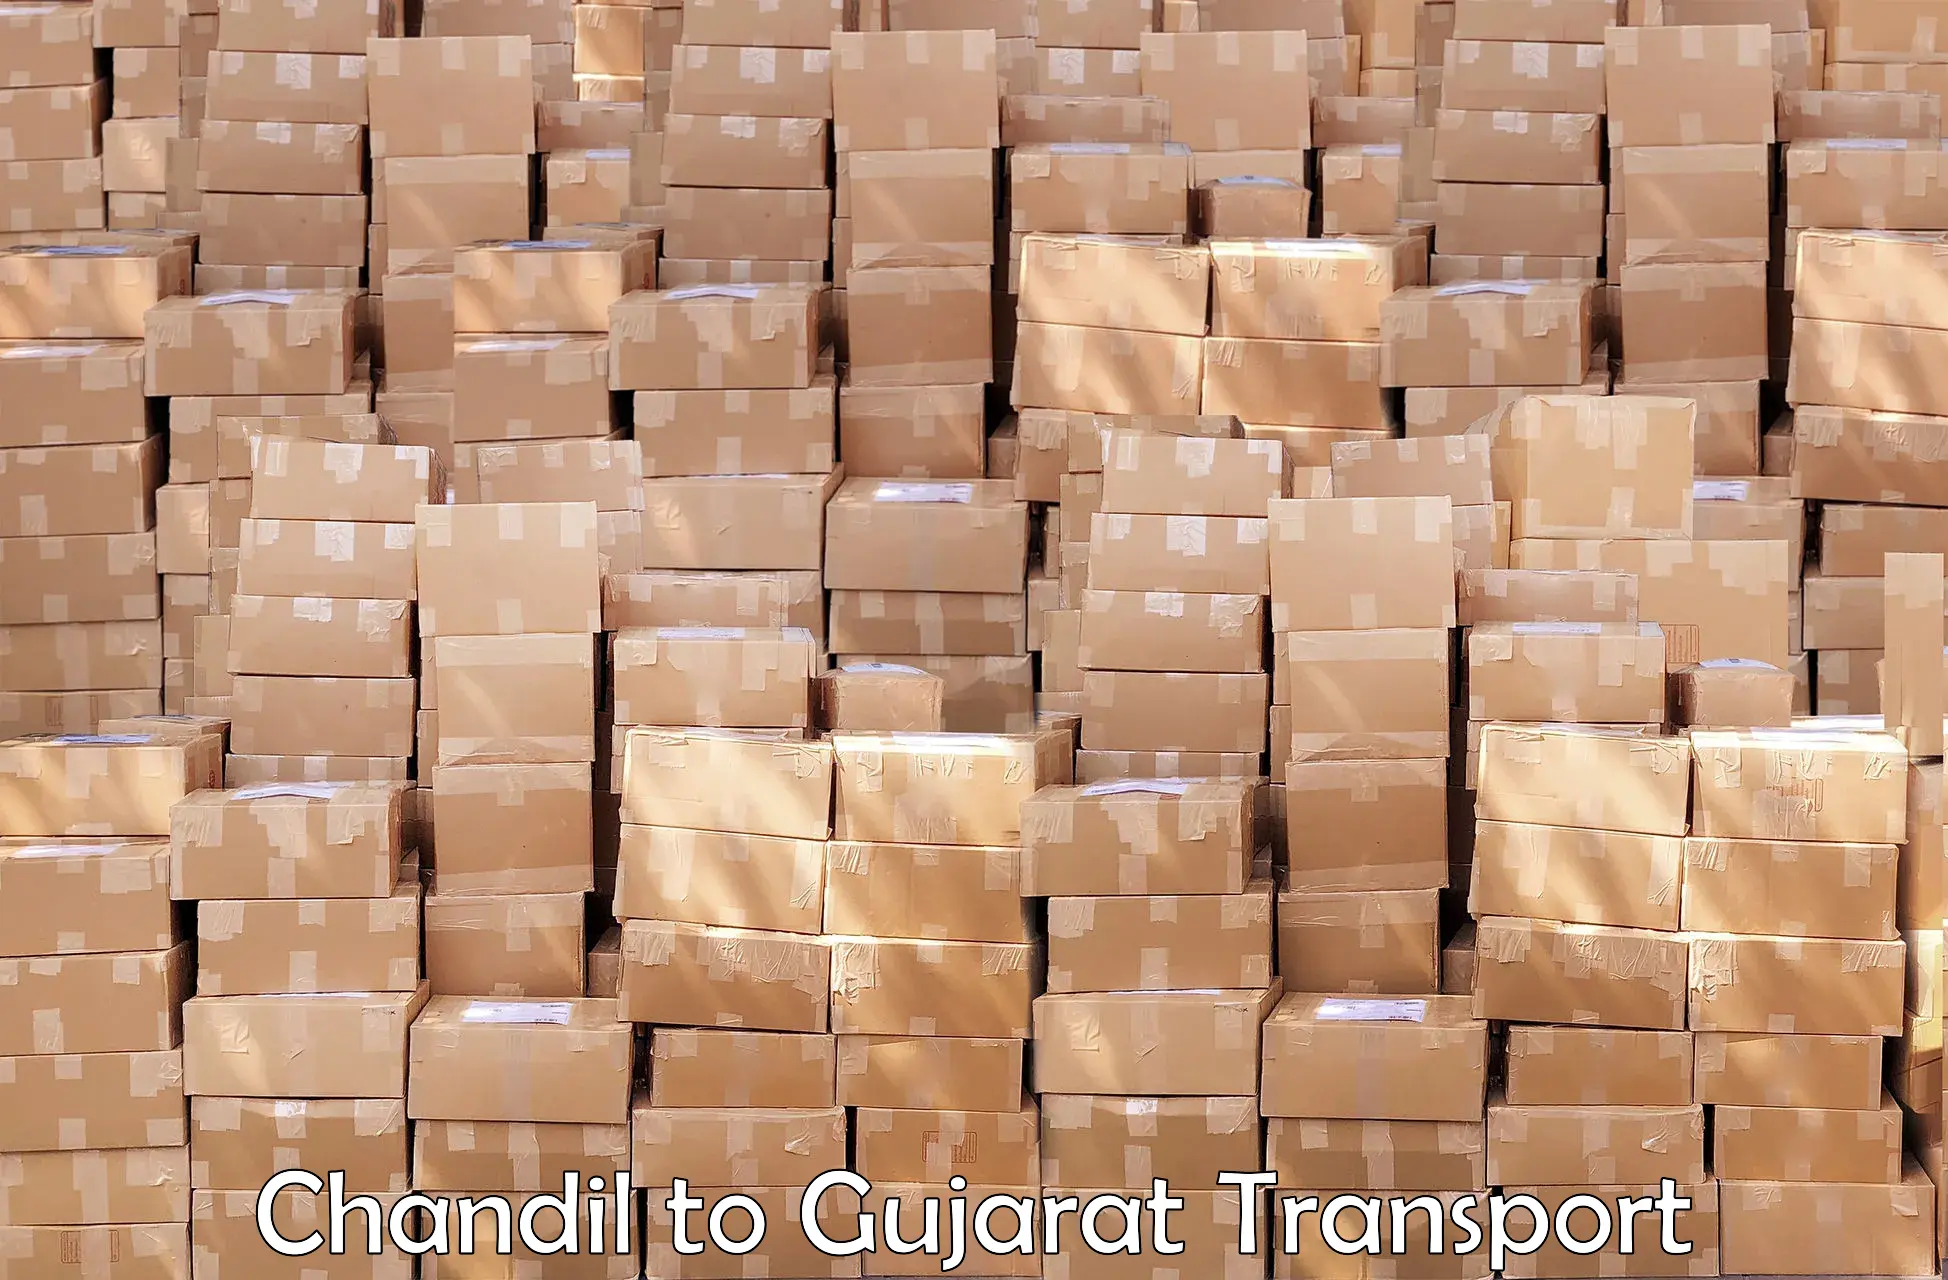 Part load transport service in India Chandil to Veraval